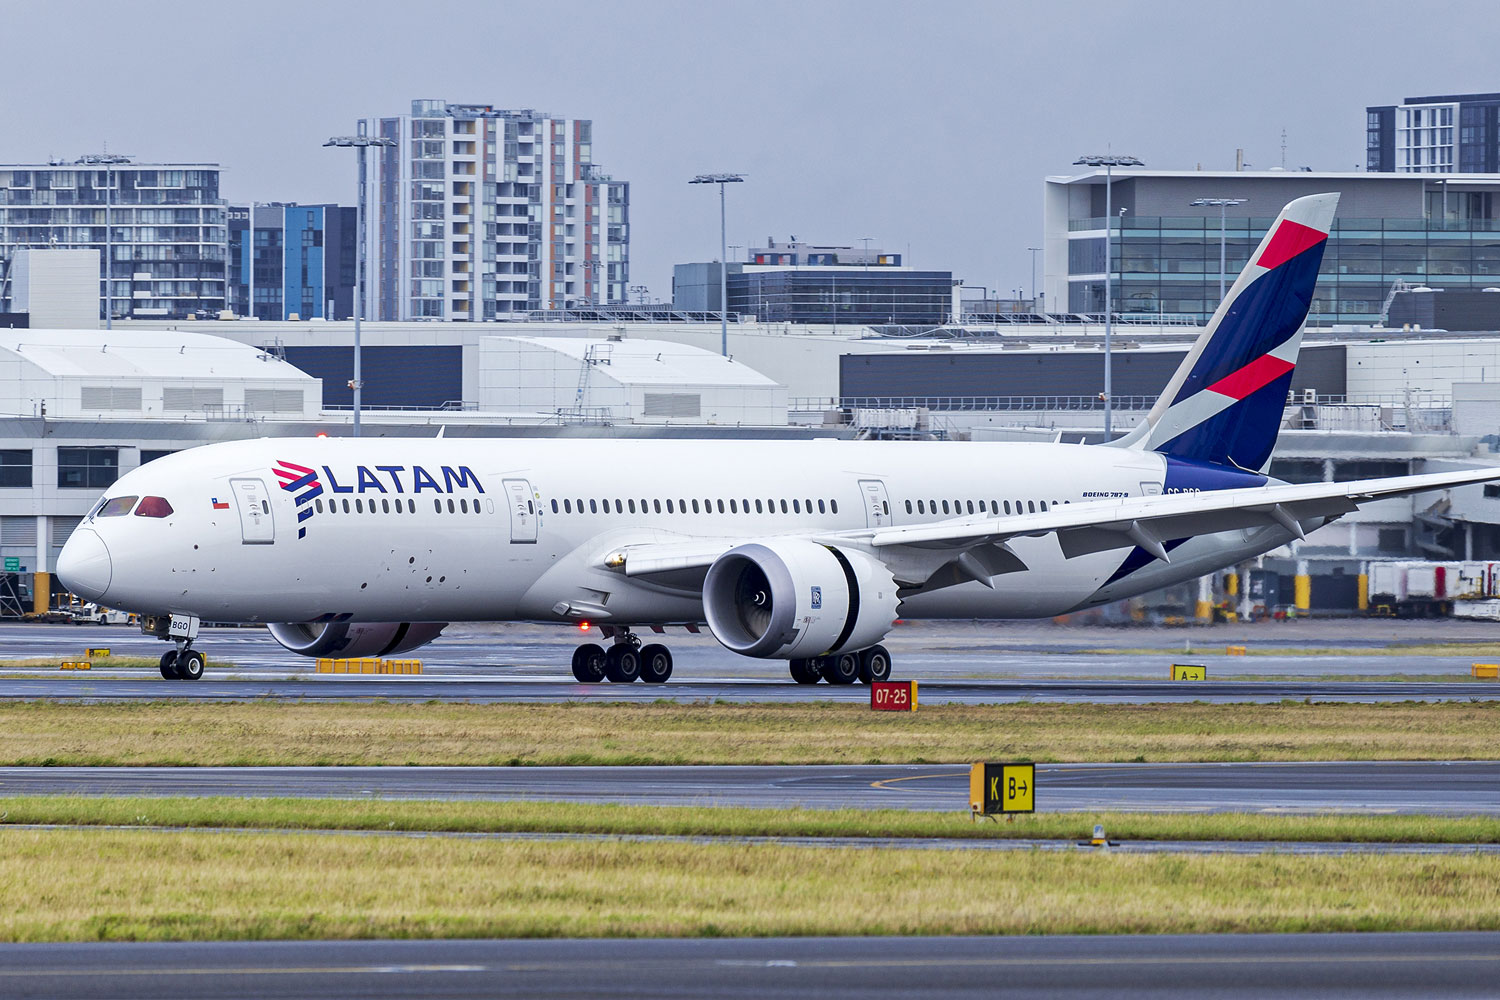 LATAM Brasil will use the Boeing 787-9 as a replacement for the